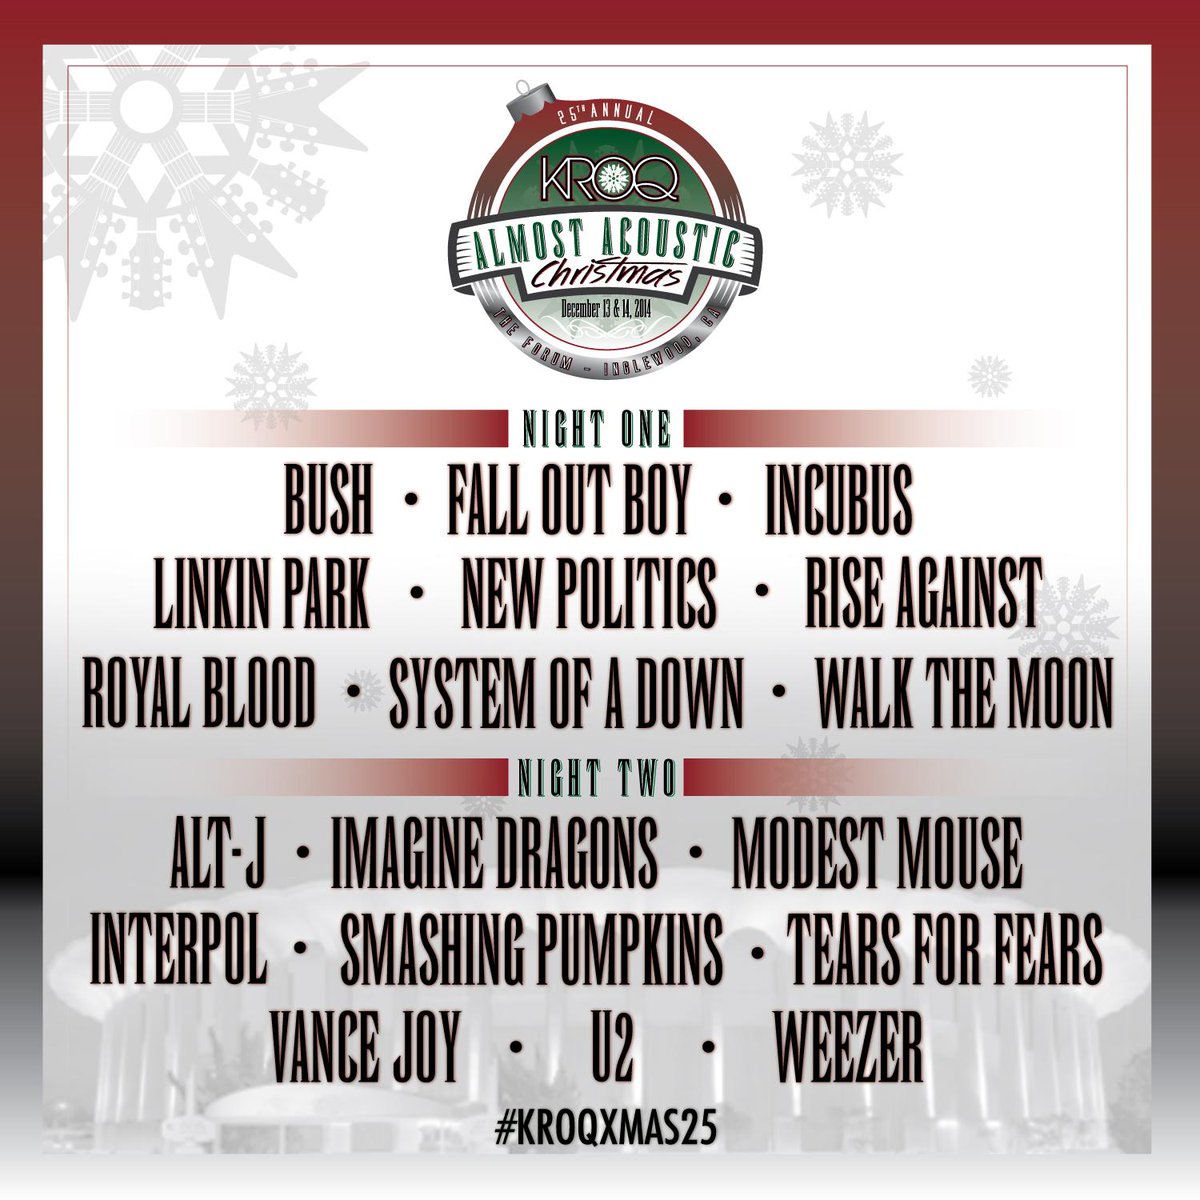 Almost Acoustic Christmas 2021 Lineup